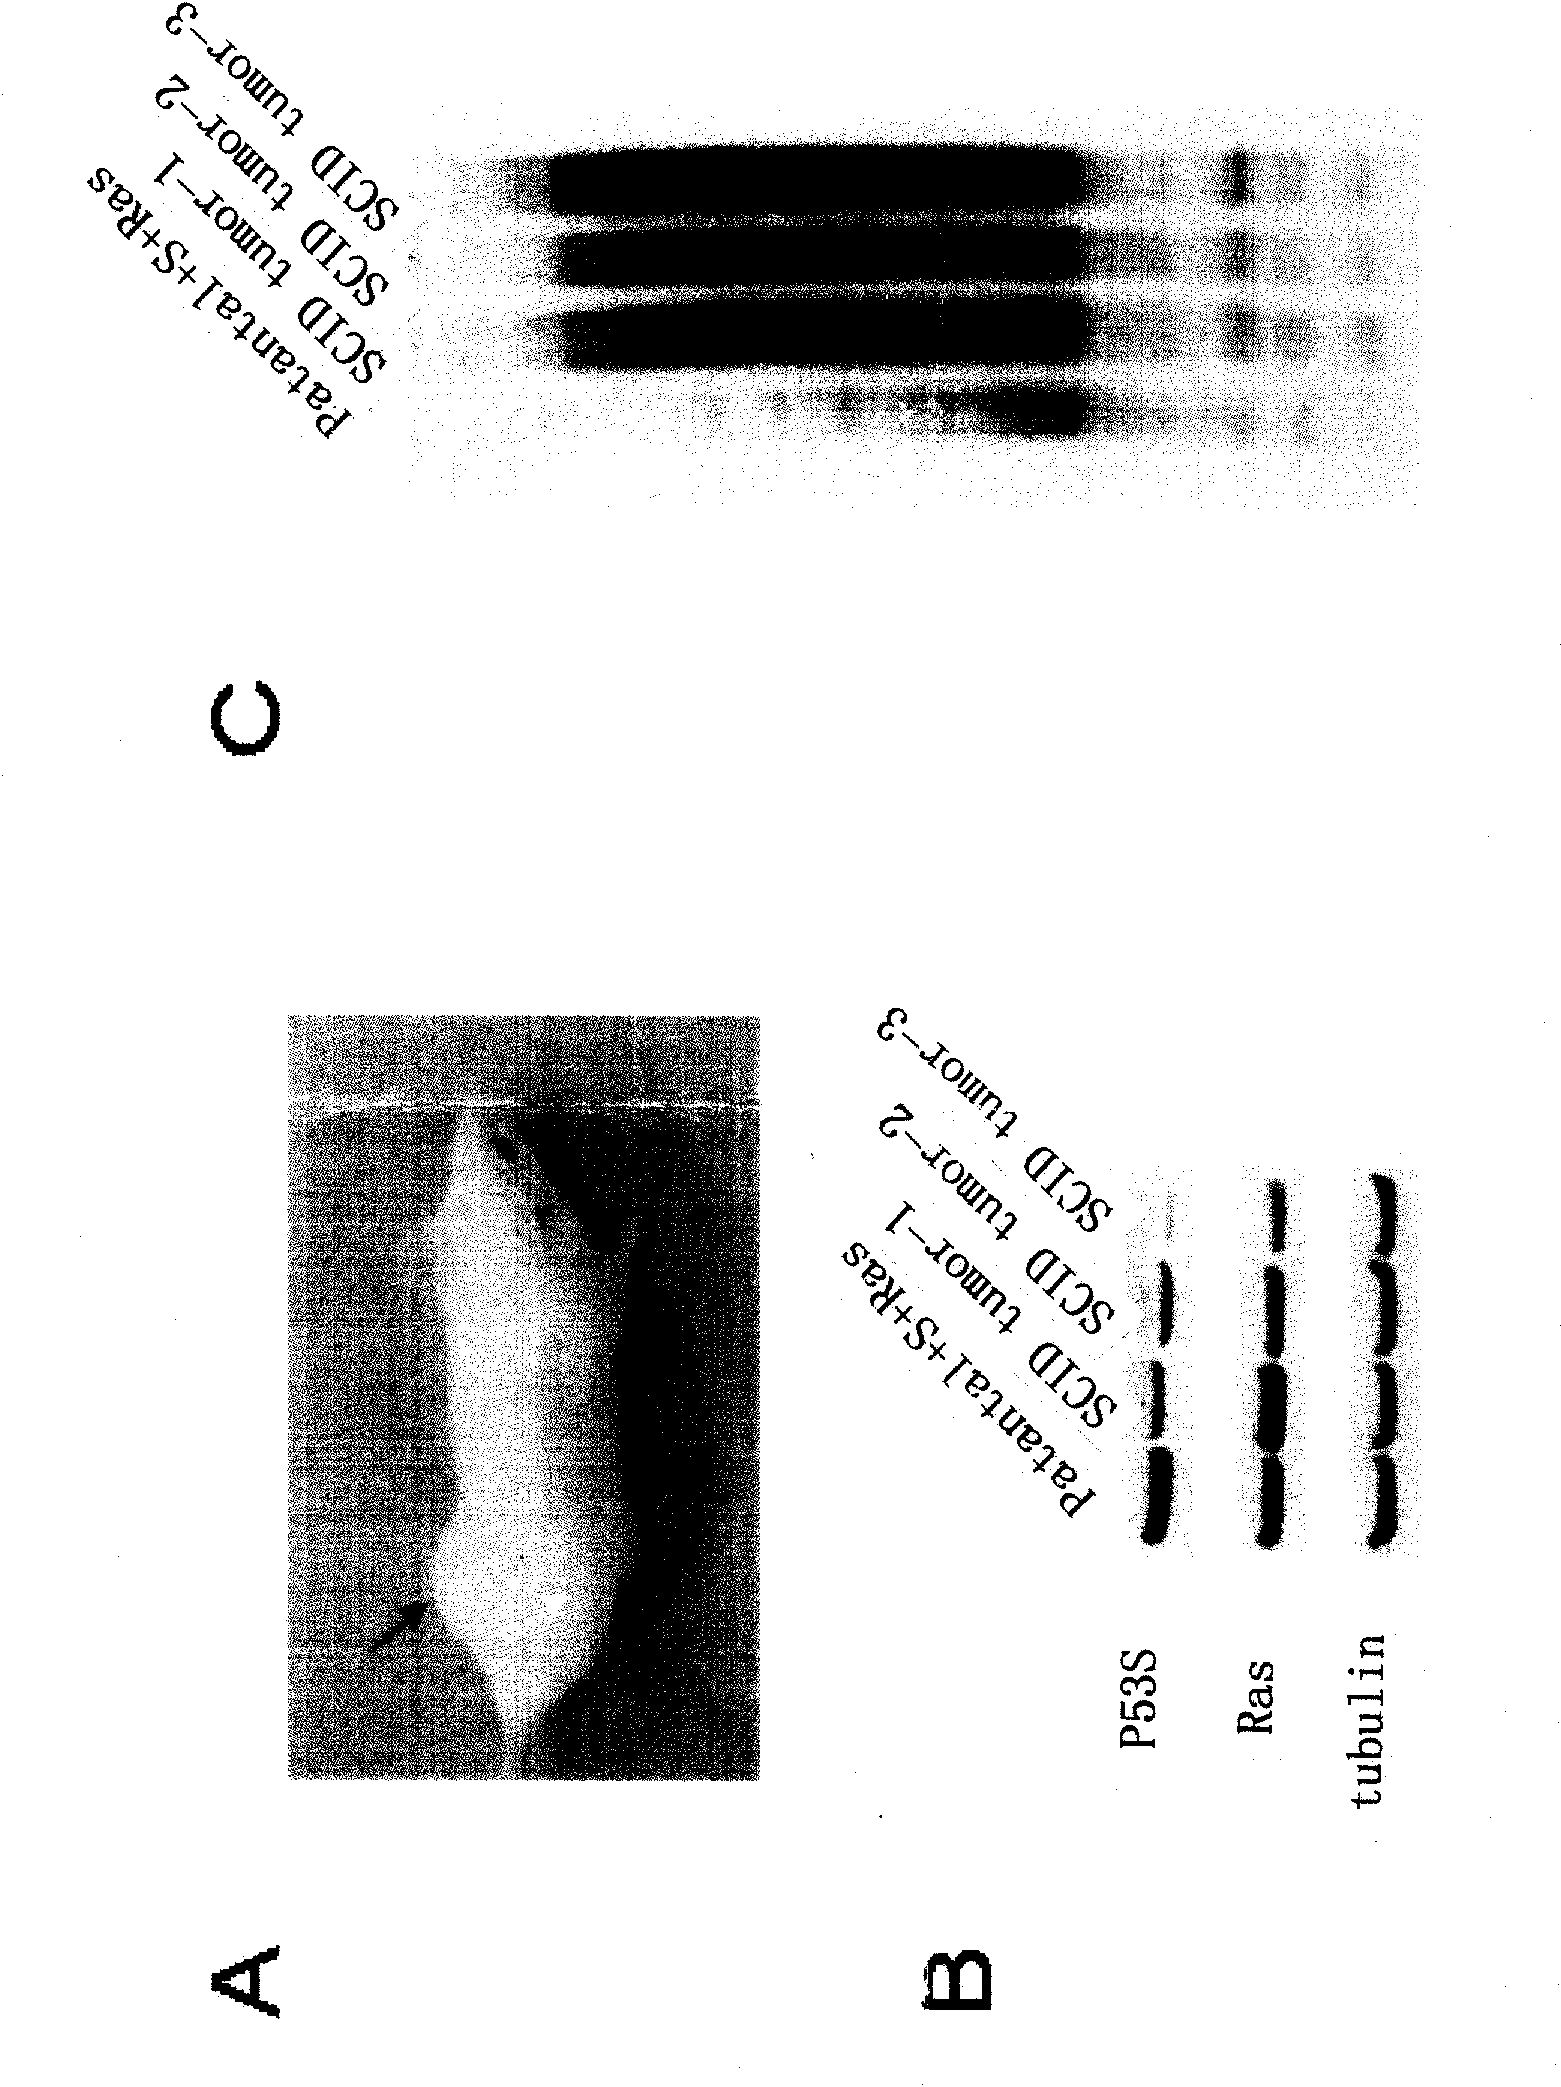 Peculiar p53 mutated protein-p53N236S of ALT tumor caused by progeria syndrome and application thereof